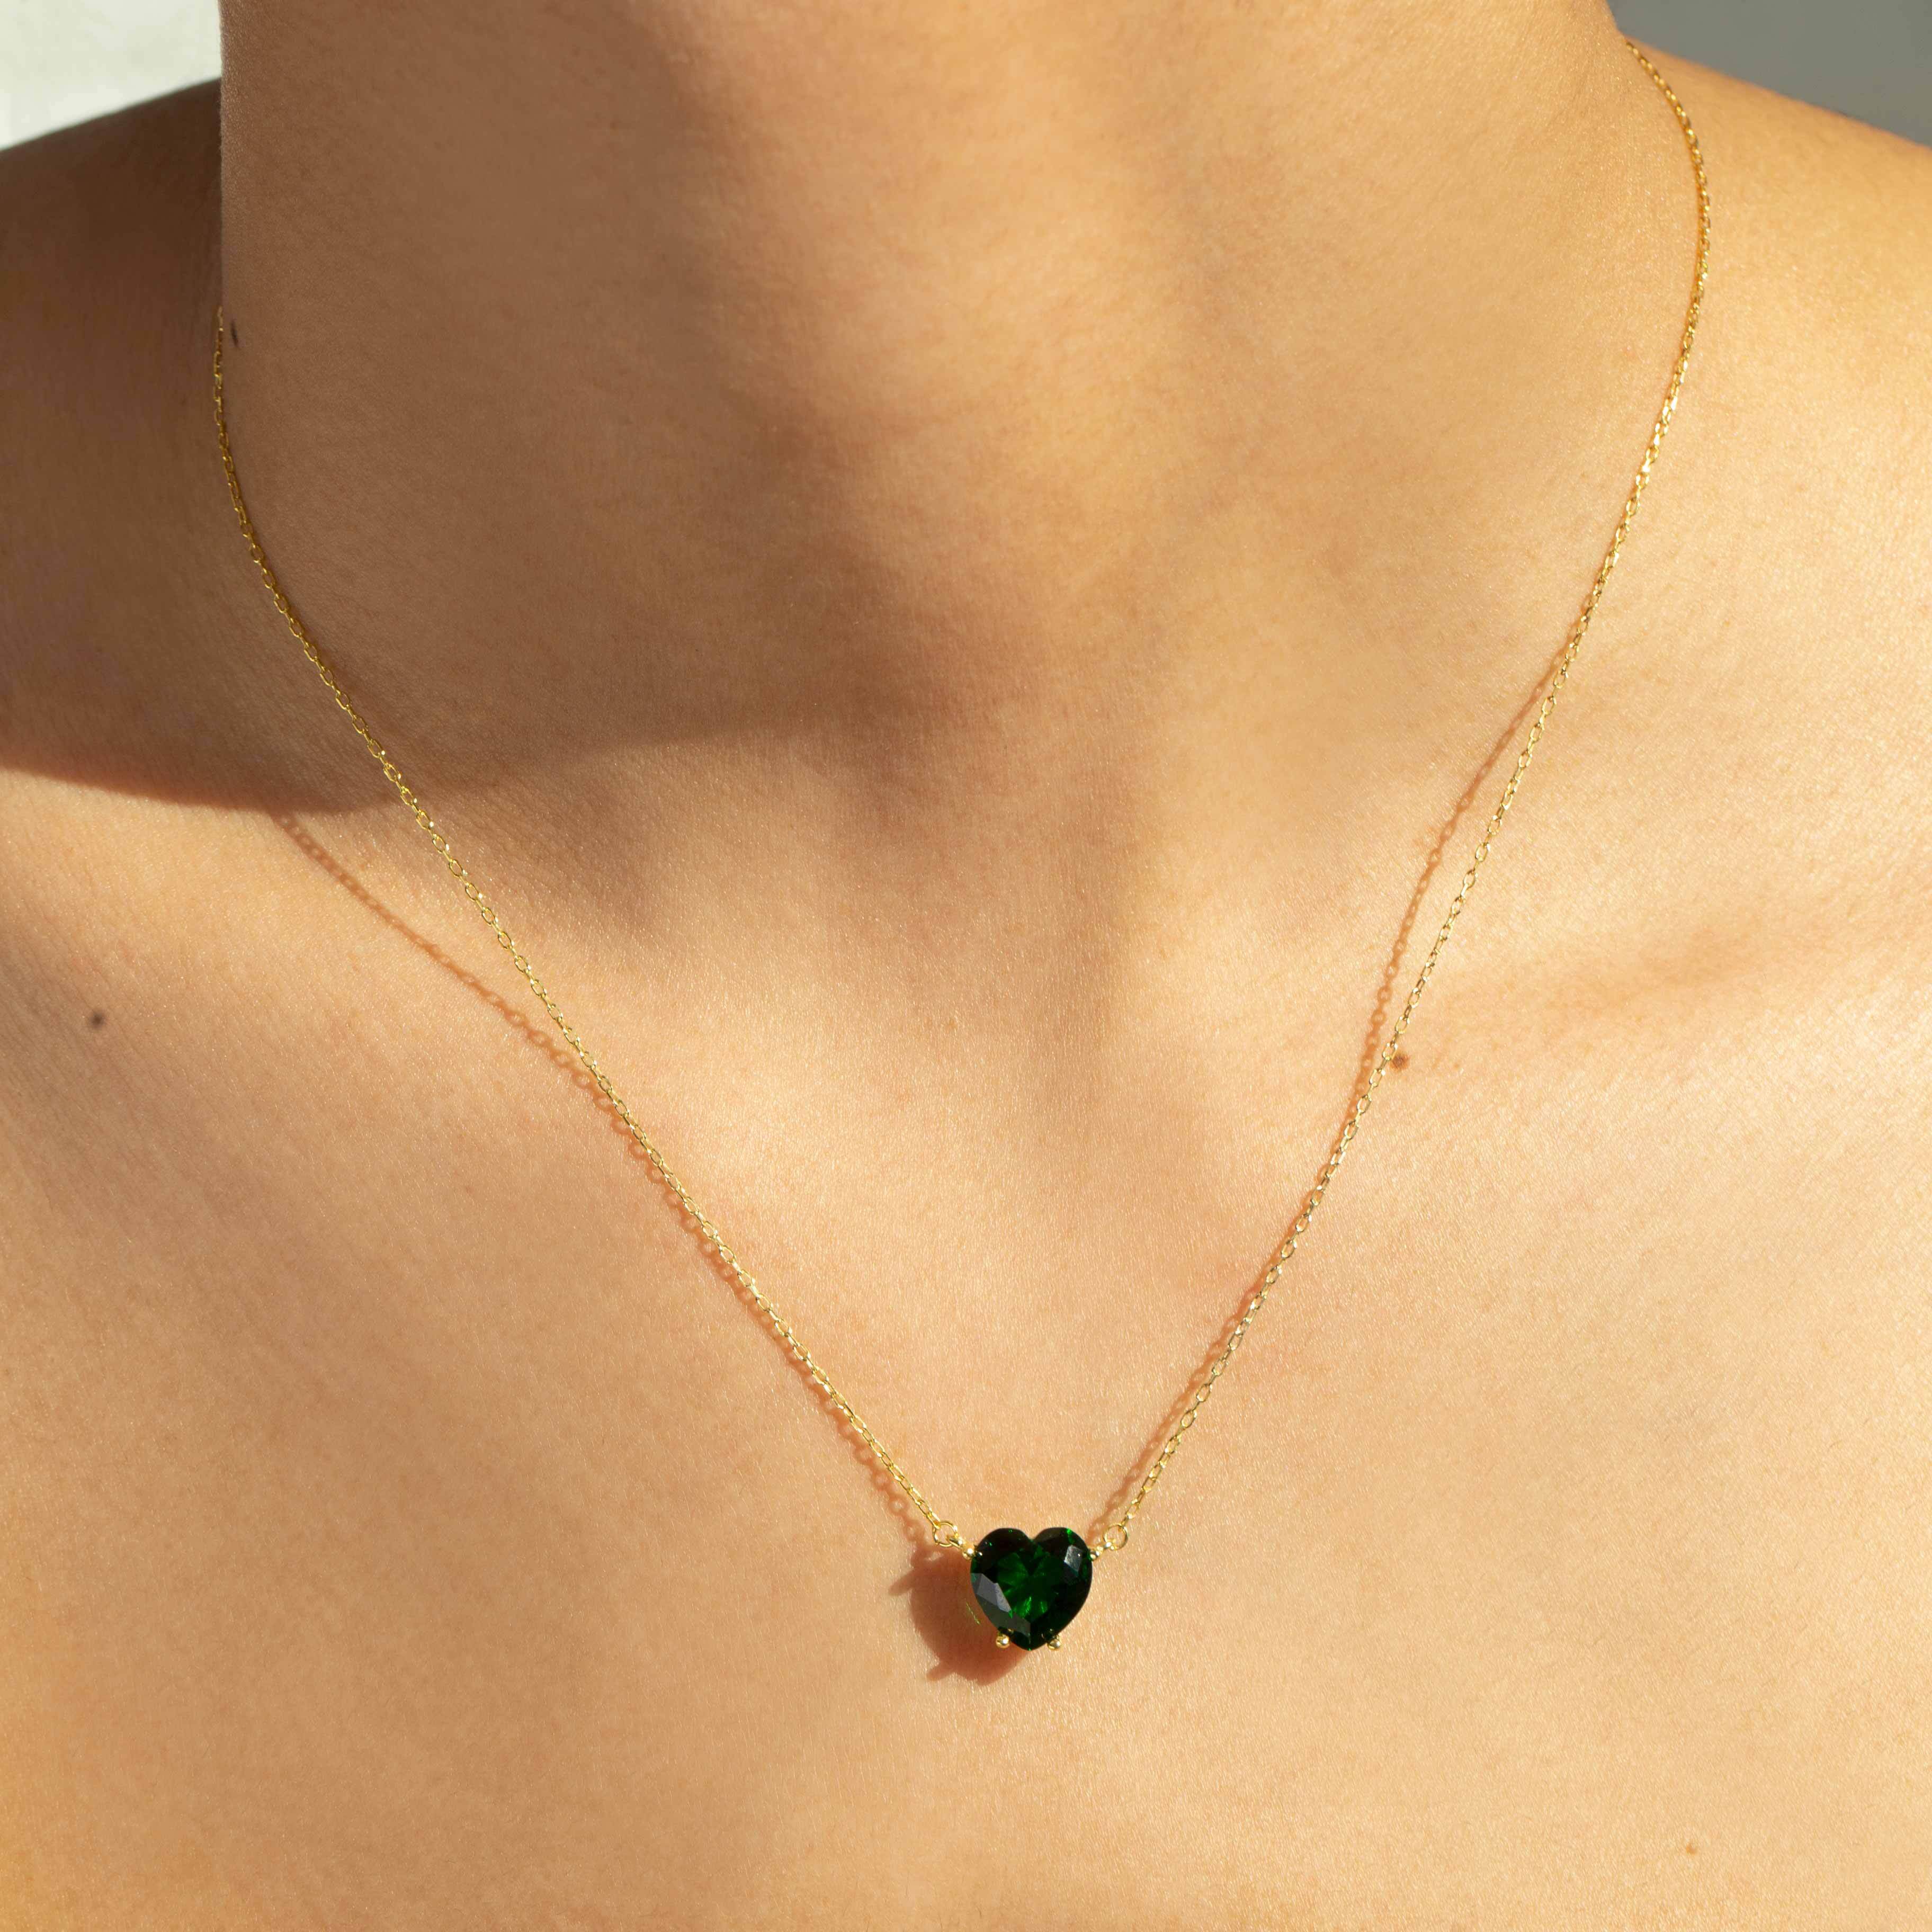 Keep it Classy Bezel Set CZ Necklace in Emerald – local eclectic